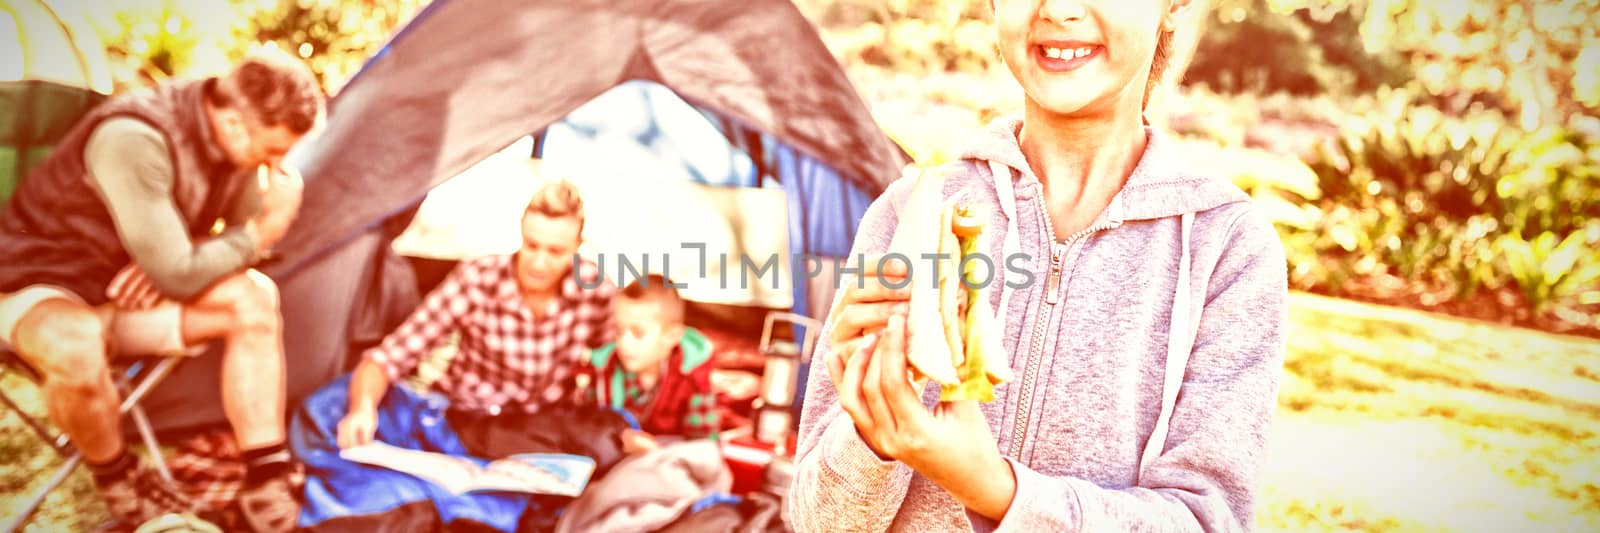 Smiling girl holding a sandwich while family sitting outside the tent by Wavebreakmedia